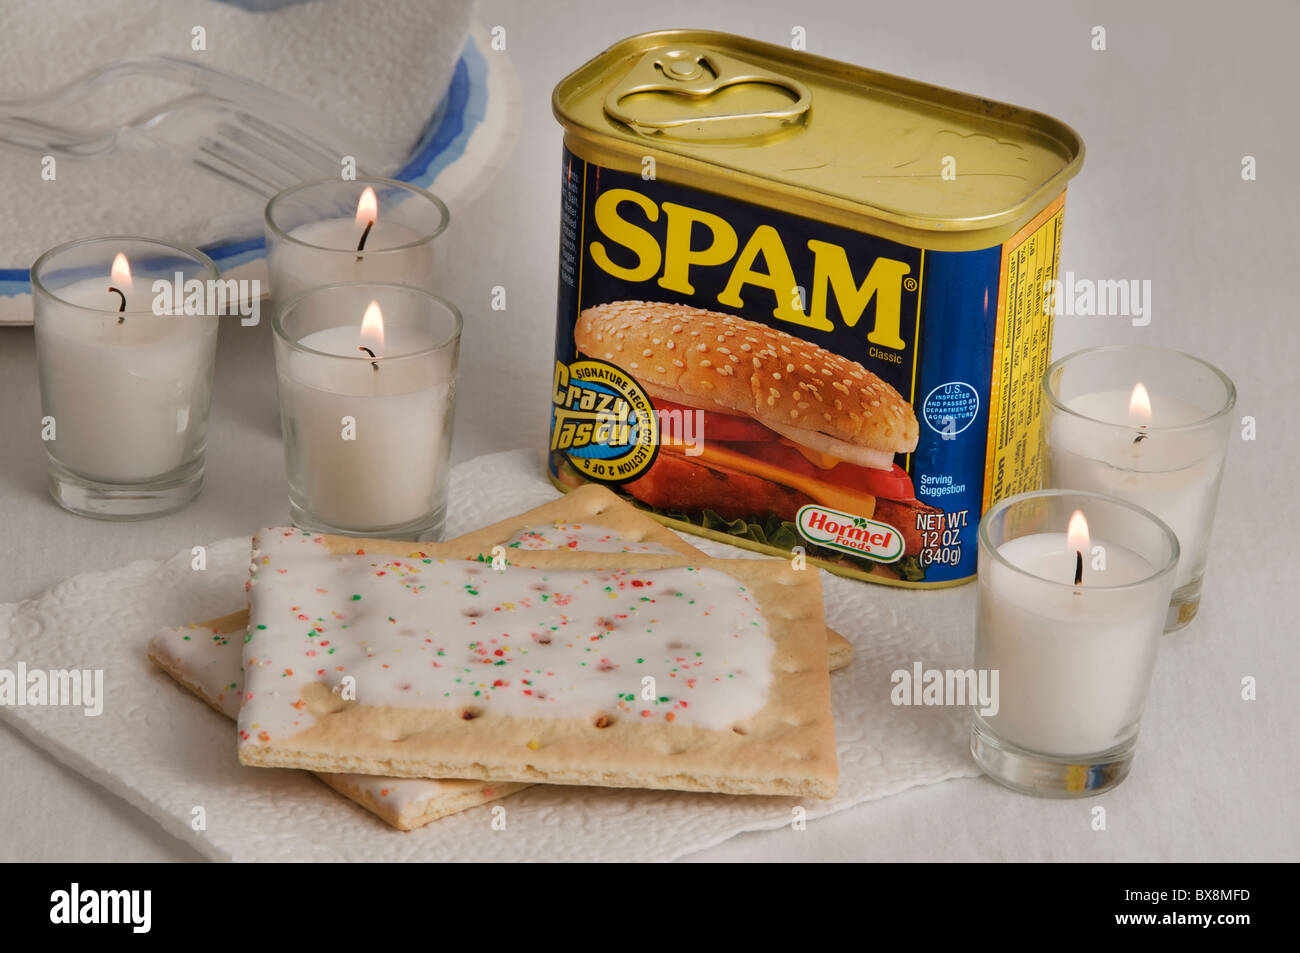 A can of Spam and frosted Pop-Tarts are served by candlelight during a memorable high sea adventure on a cruise ship. Stock Photo